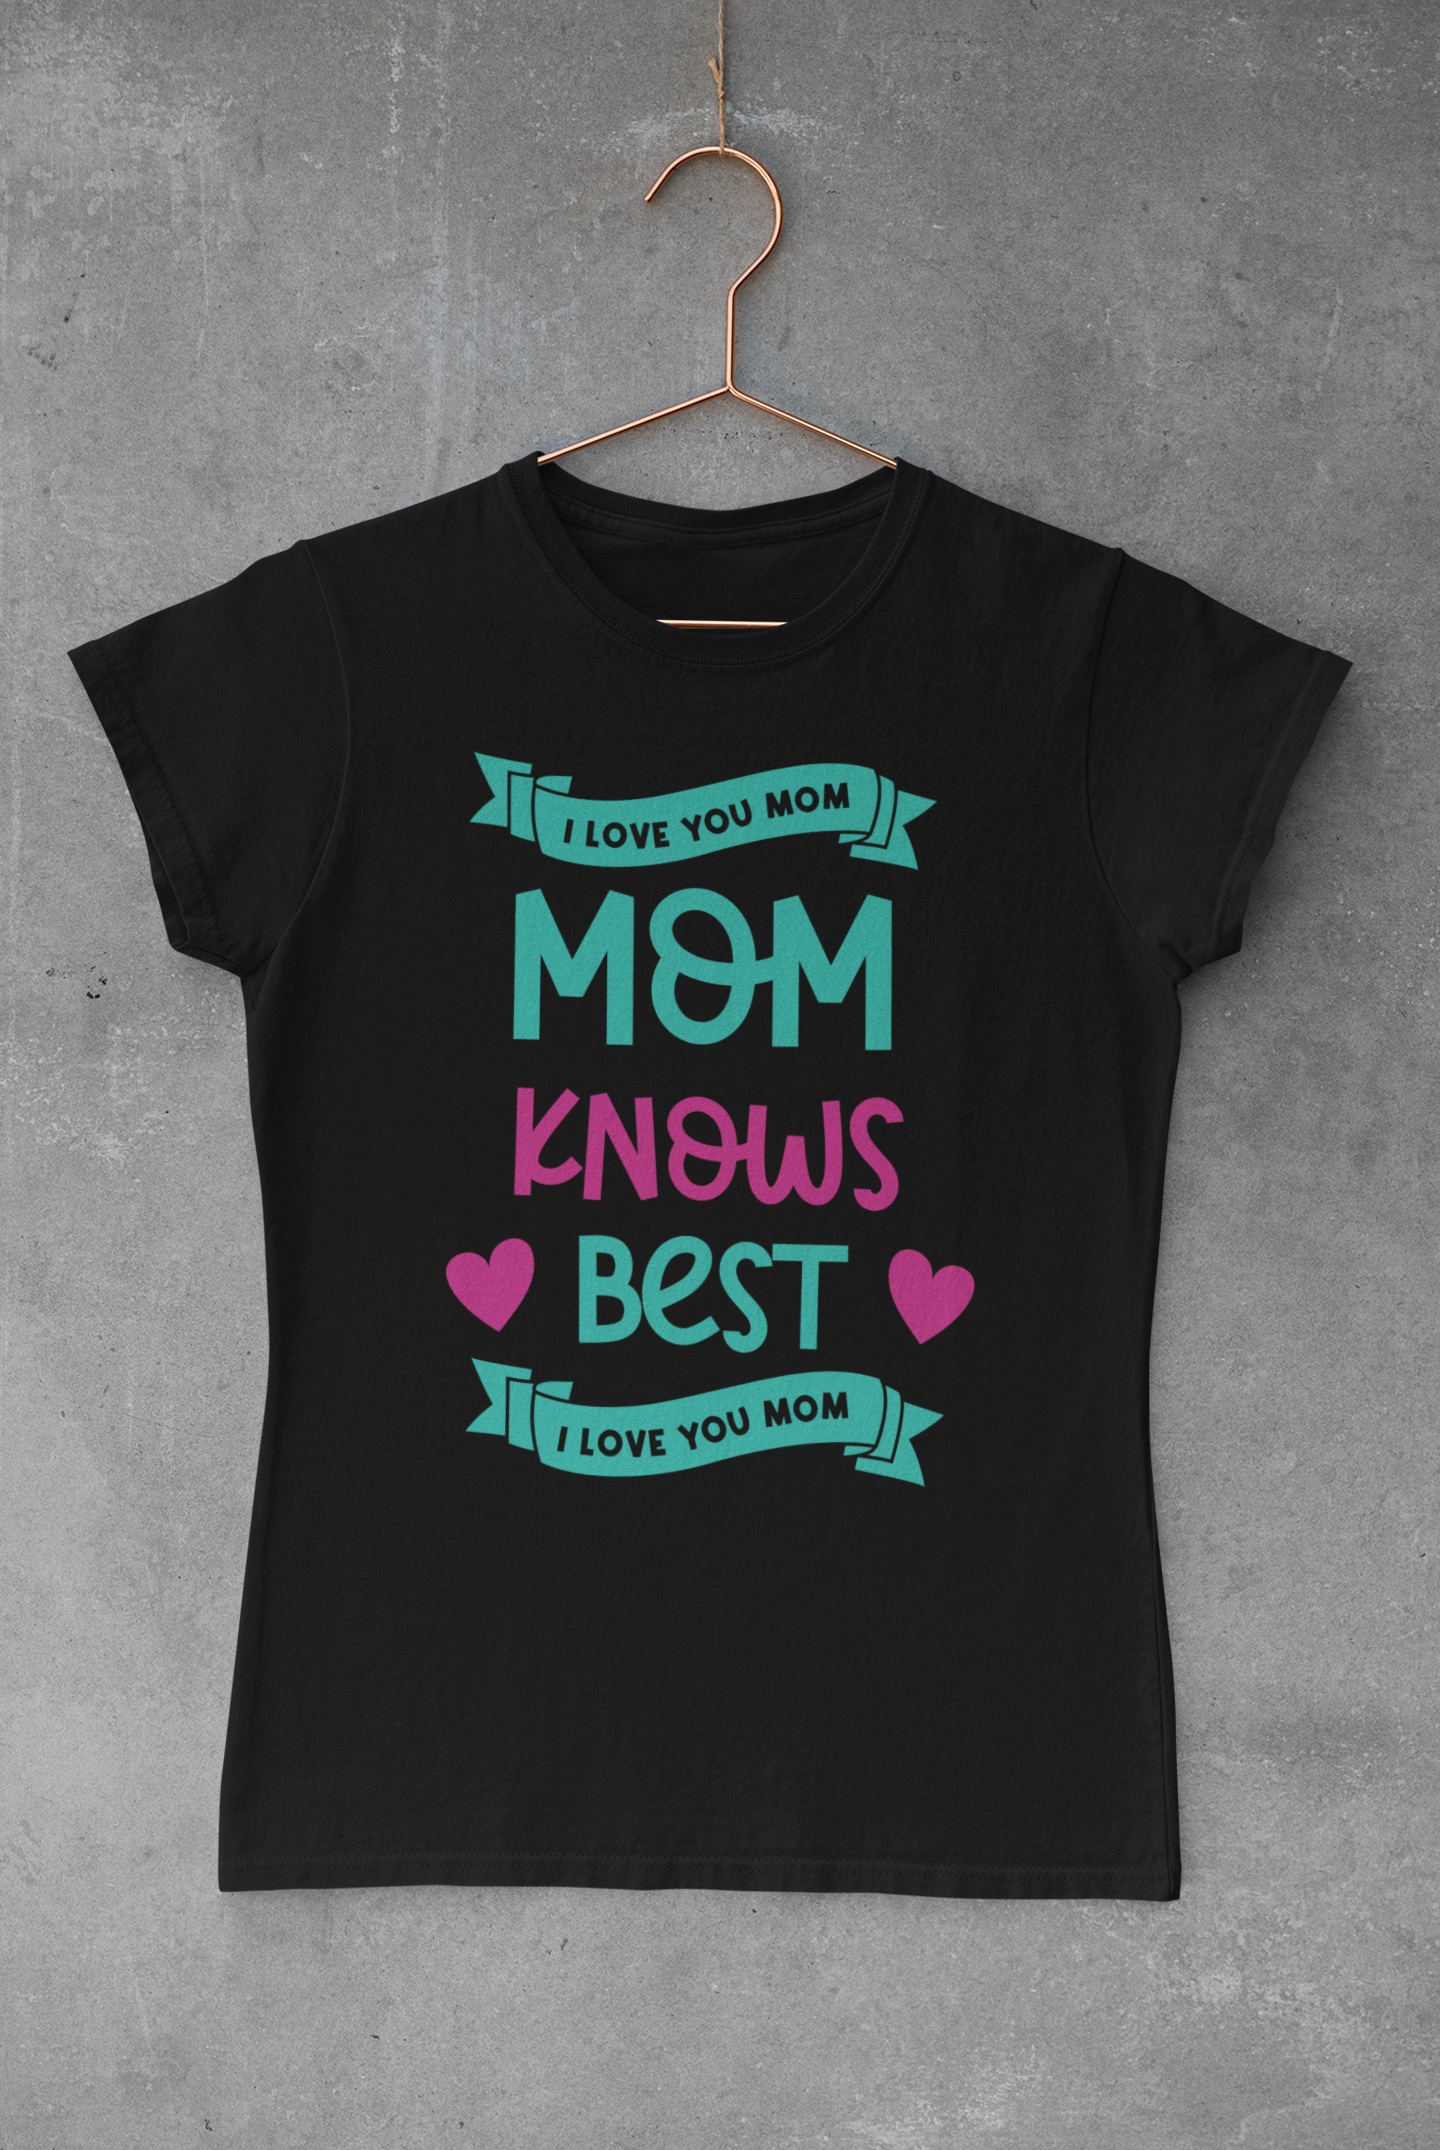 Mom Knows Best T-shirt